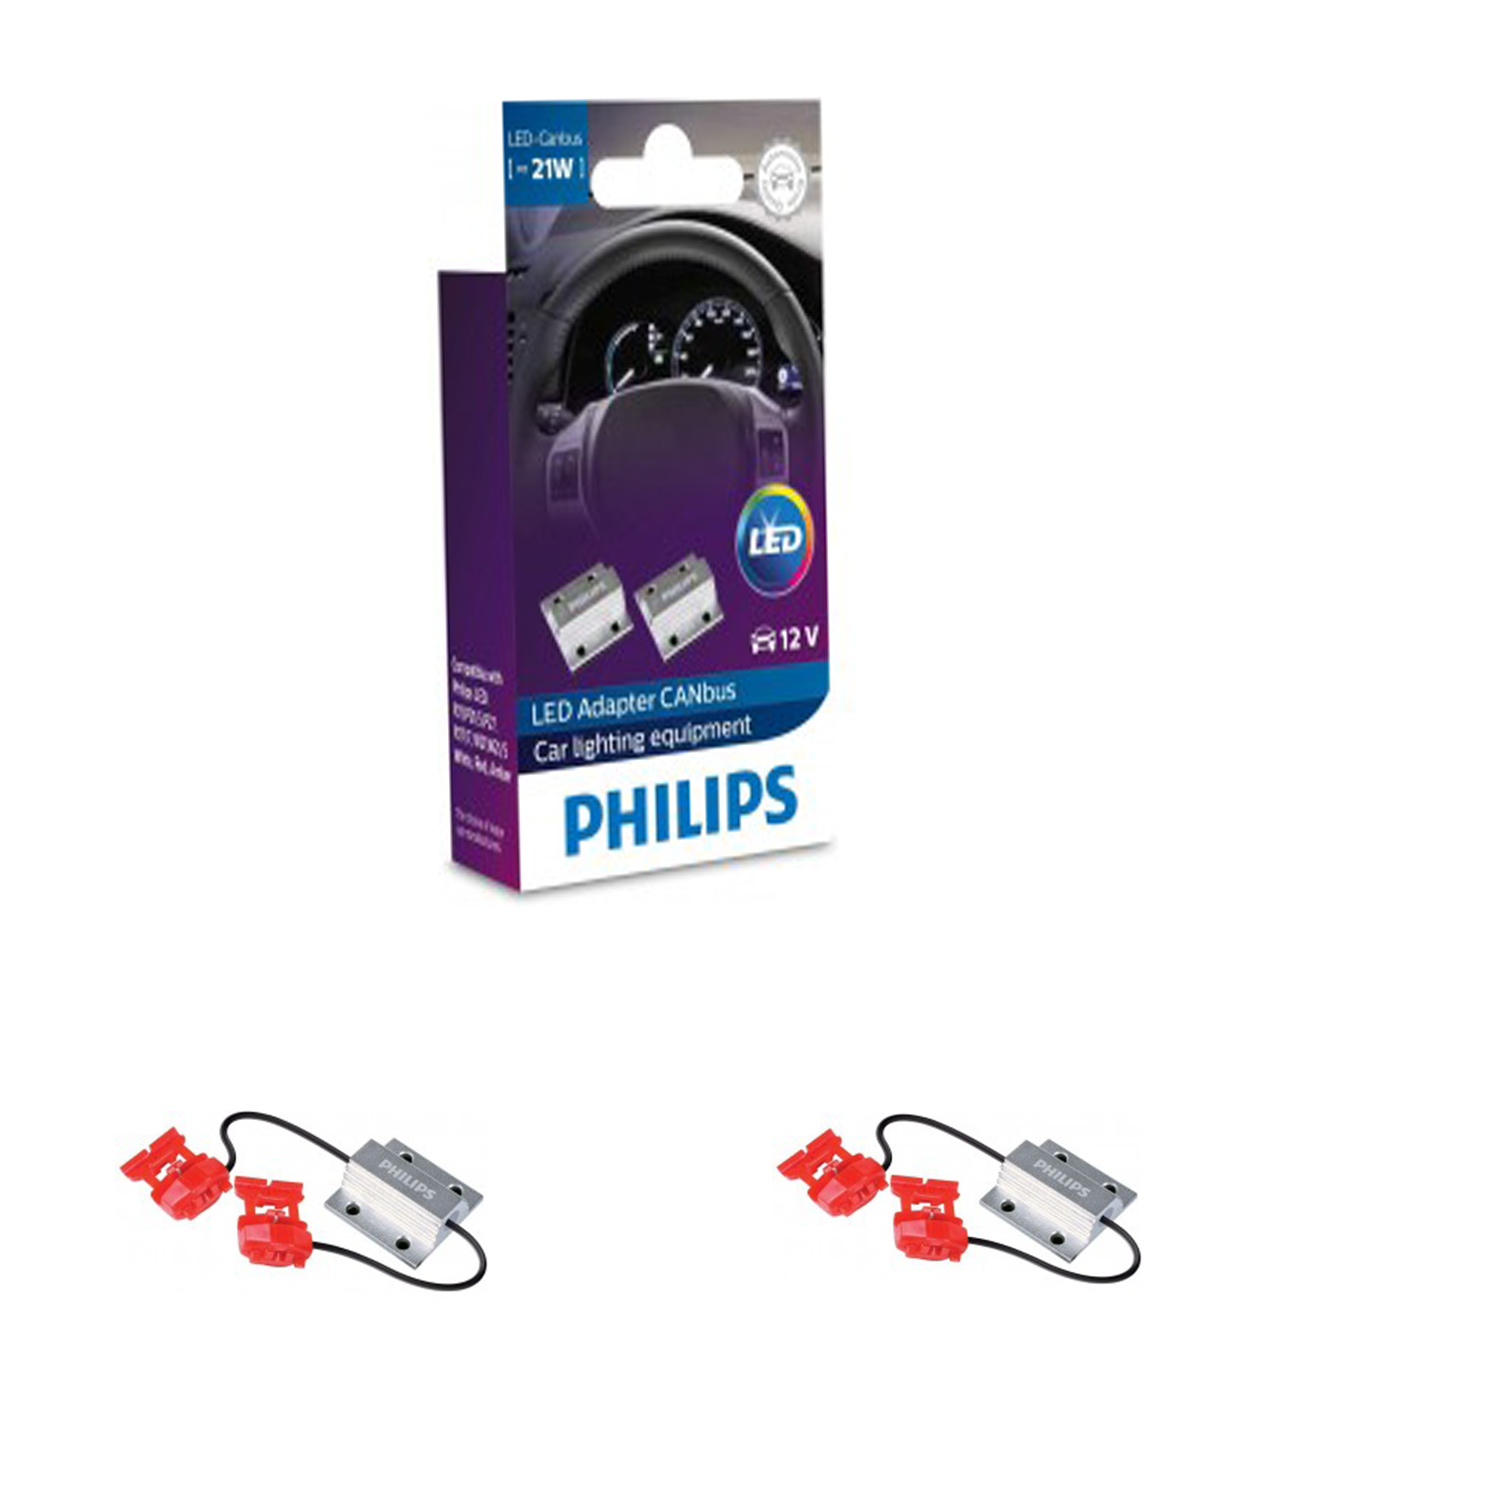 ADAPTER LED CAN BUS PHILIPS 21w 2 Τεμάχια